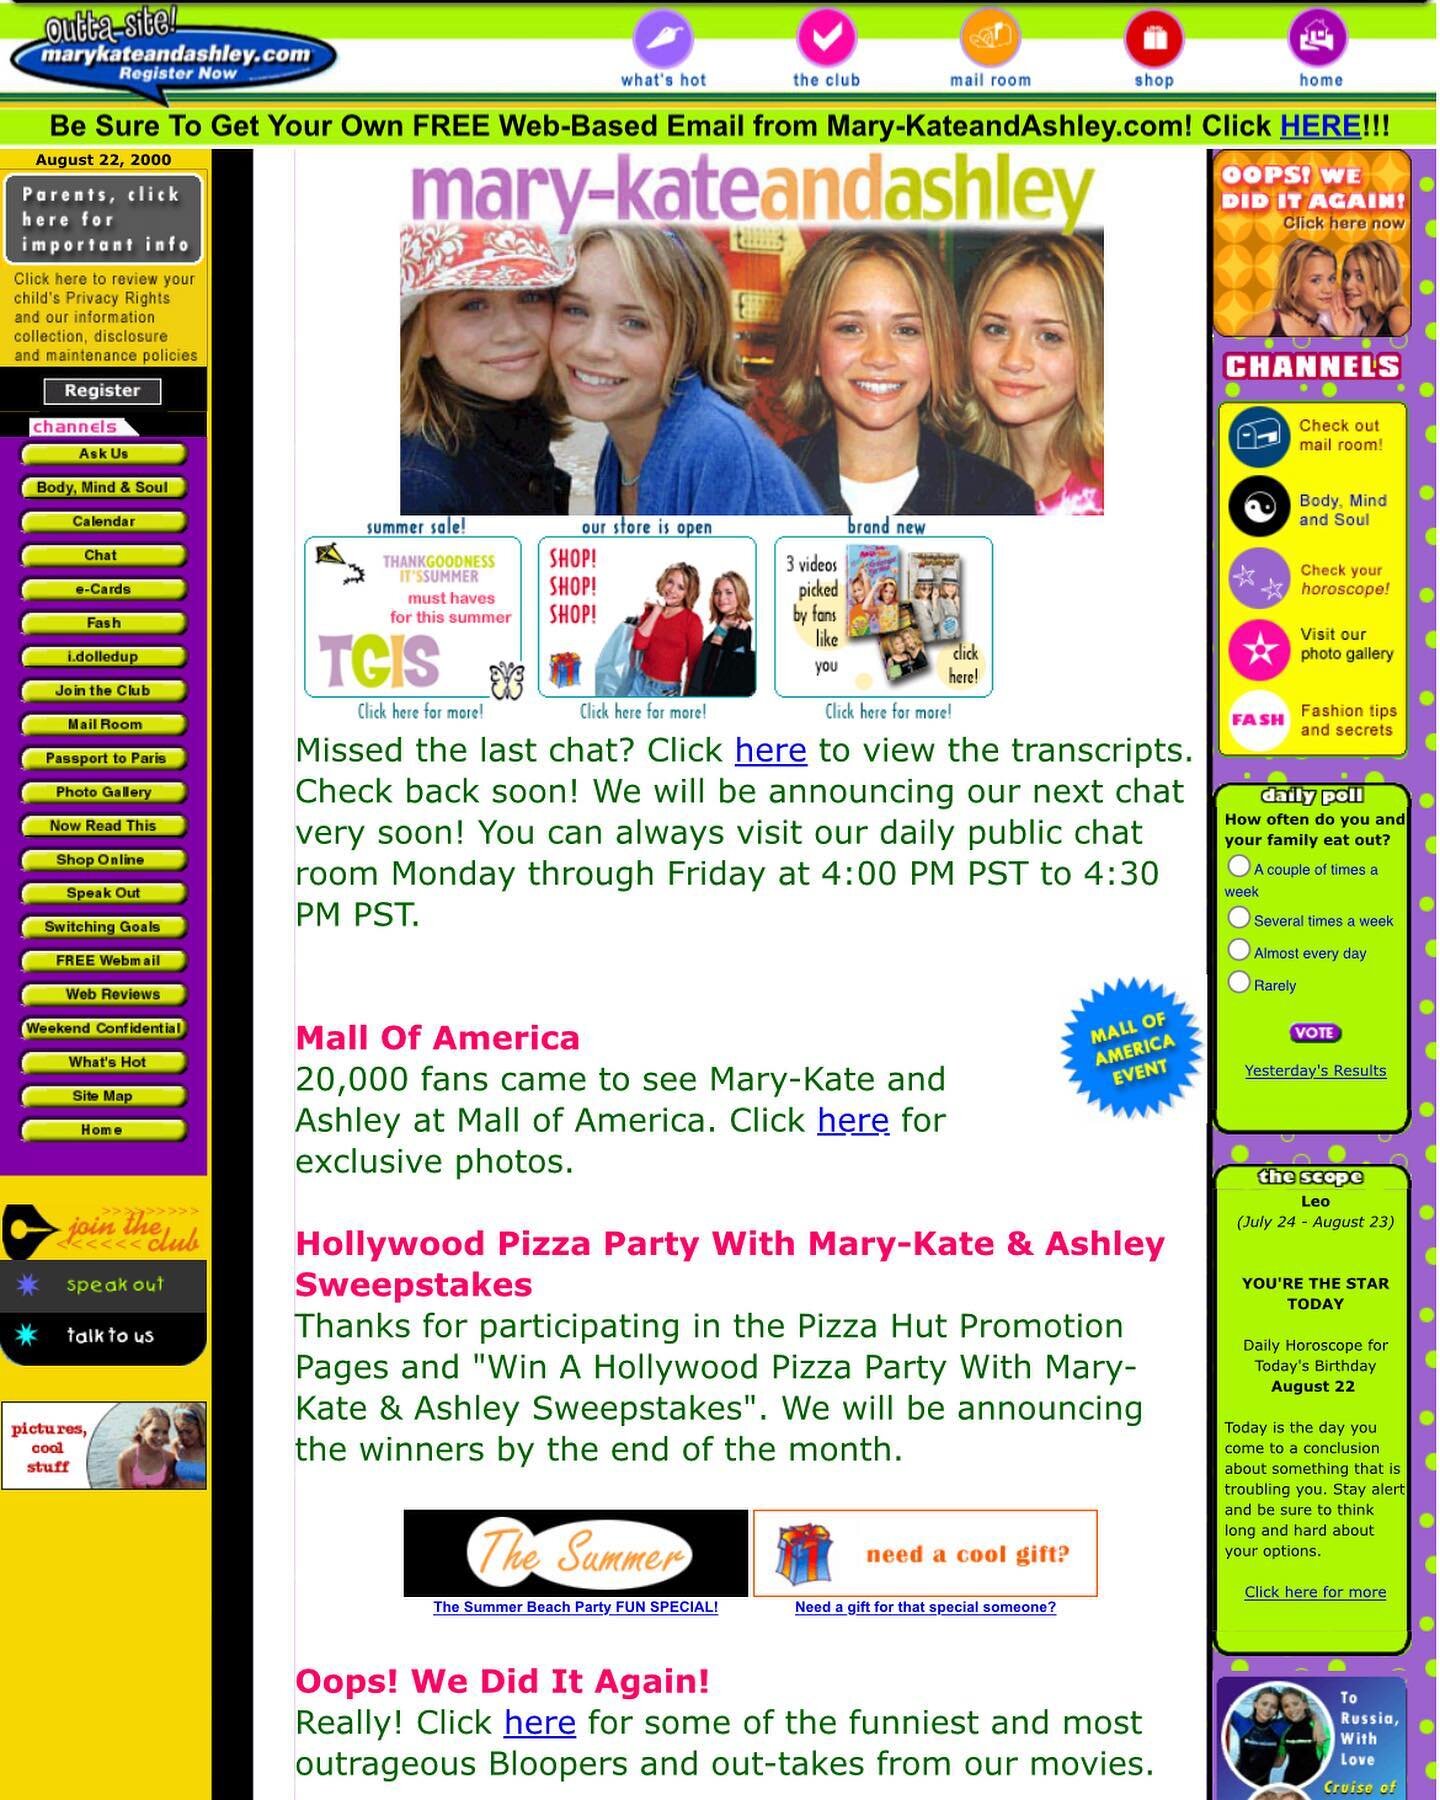 In the late 90s, Mary-Kate and Ashley Olsen launched one of the most epic websites of all time: marykateandashley.com. For today's episode, because of a wonderful tool called The Wayback Machine, we were able to travel back in time to visit this webs